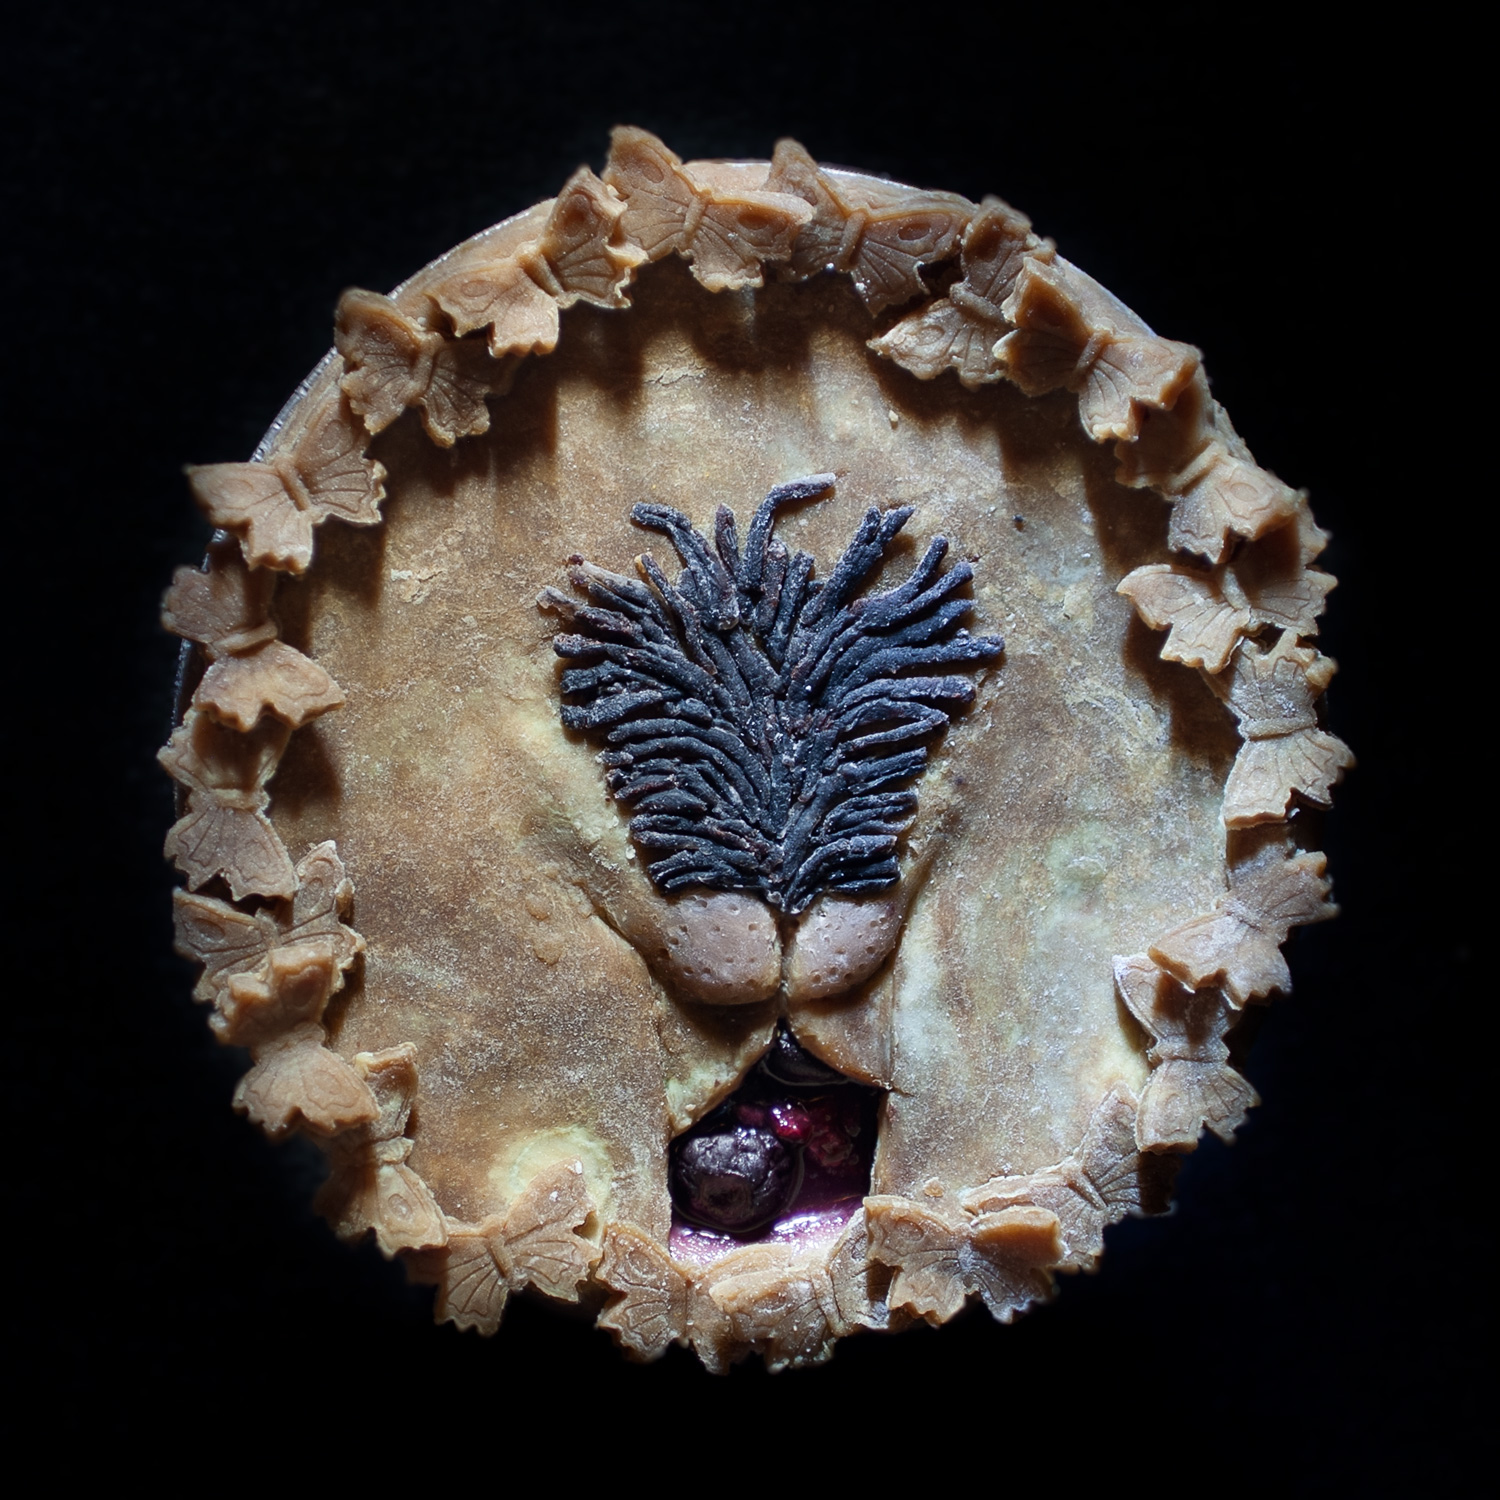 unbaked six inch cherry berry berry pie with hand sculpted pie crust art made to look like a vulva with exposed labia majora and brown, pubic hair